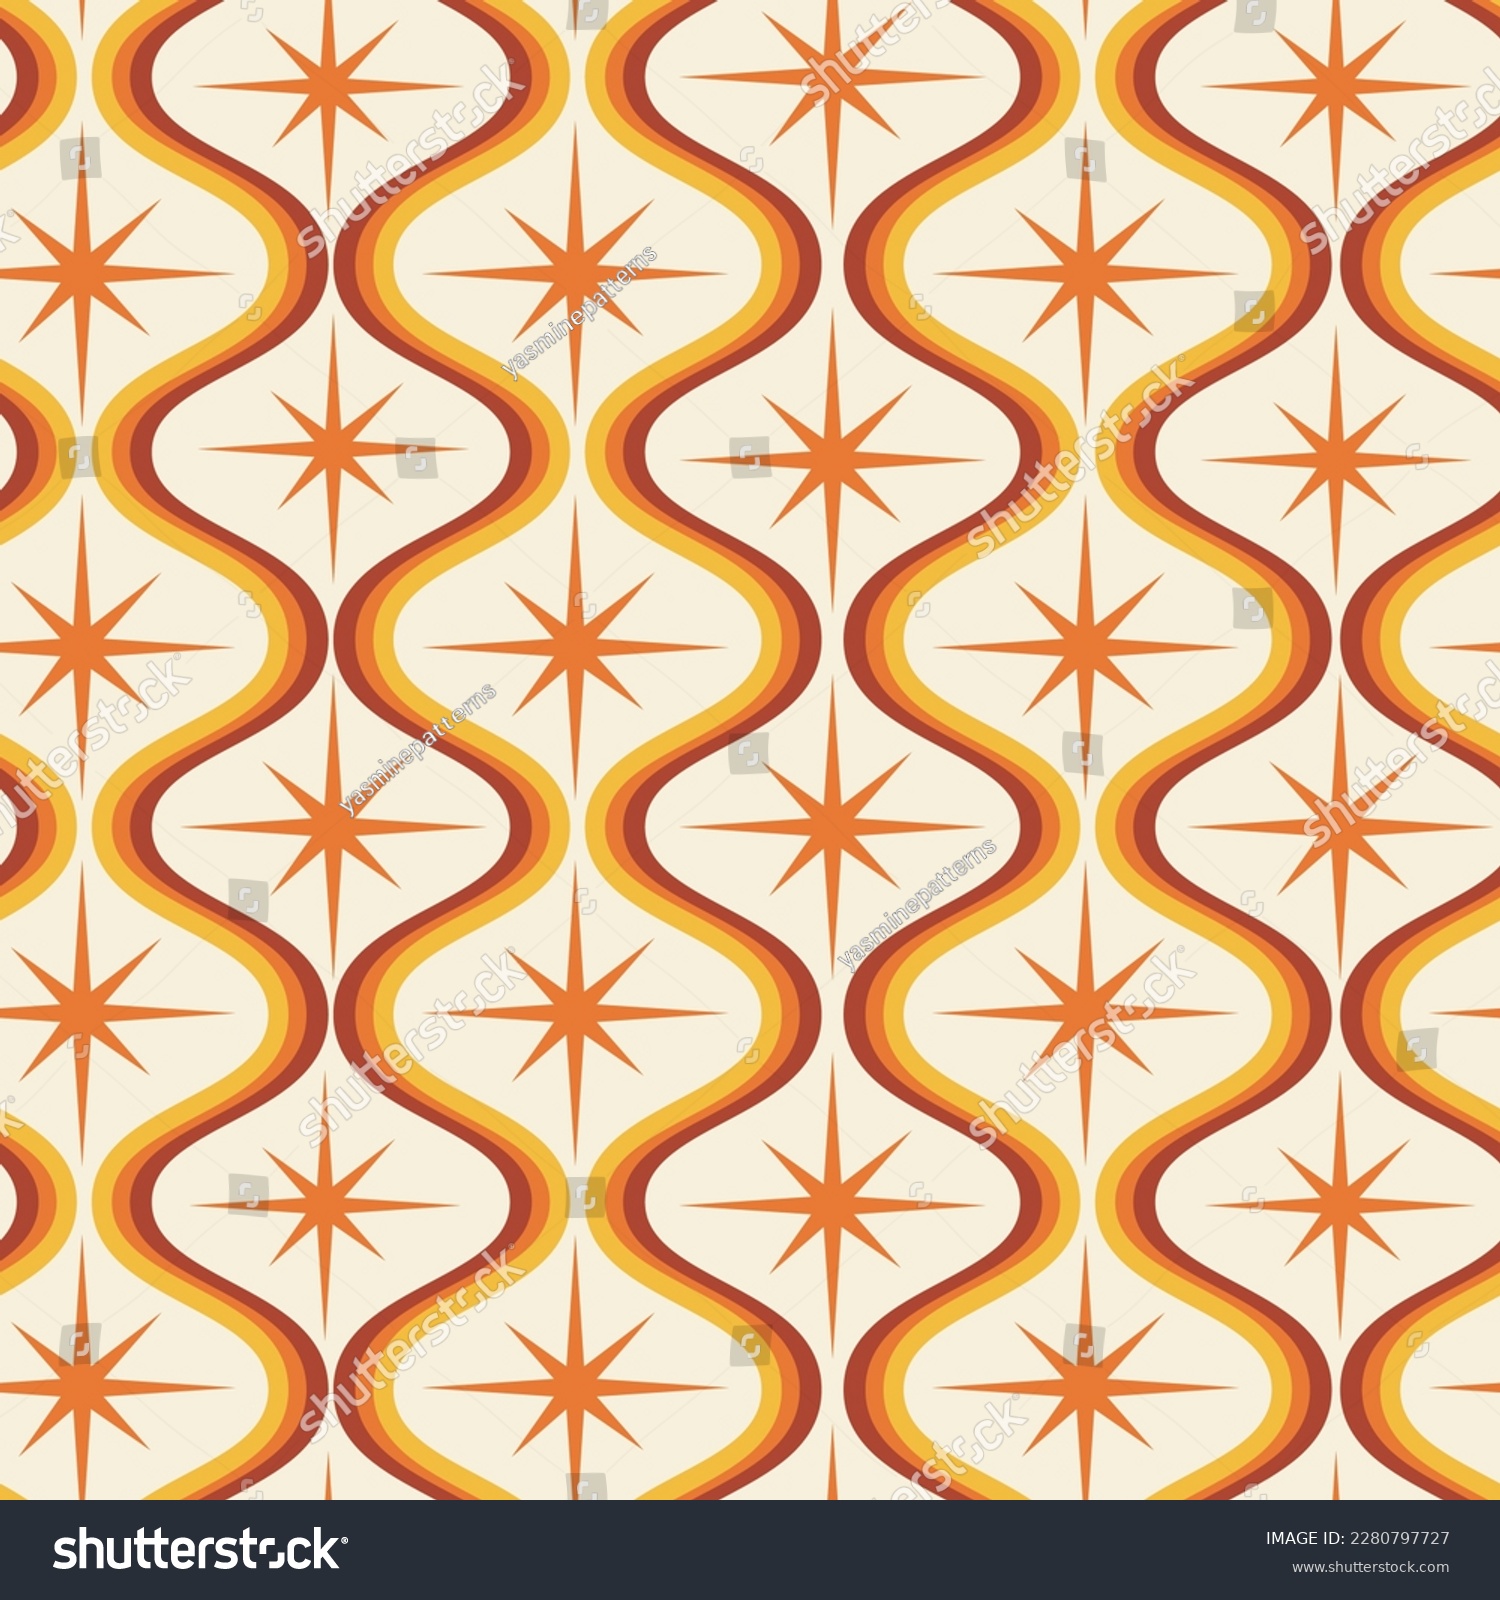 SVG of Mid century modern orange atomic starburst on ogee oval shapes seamless pattern in orange, yellow and burgundy. For textile, home decor, wallpaper and fabric svg